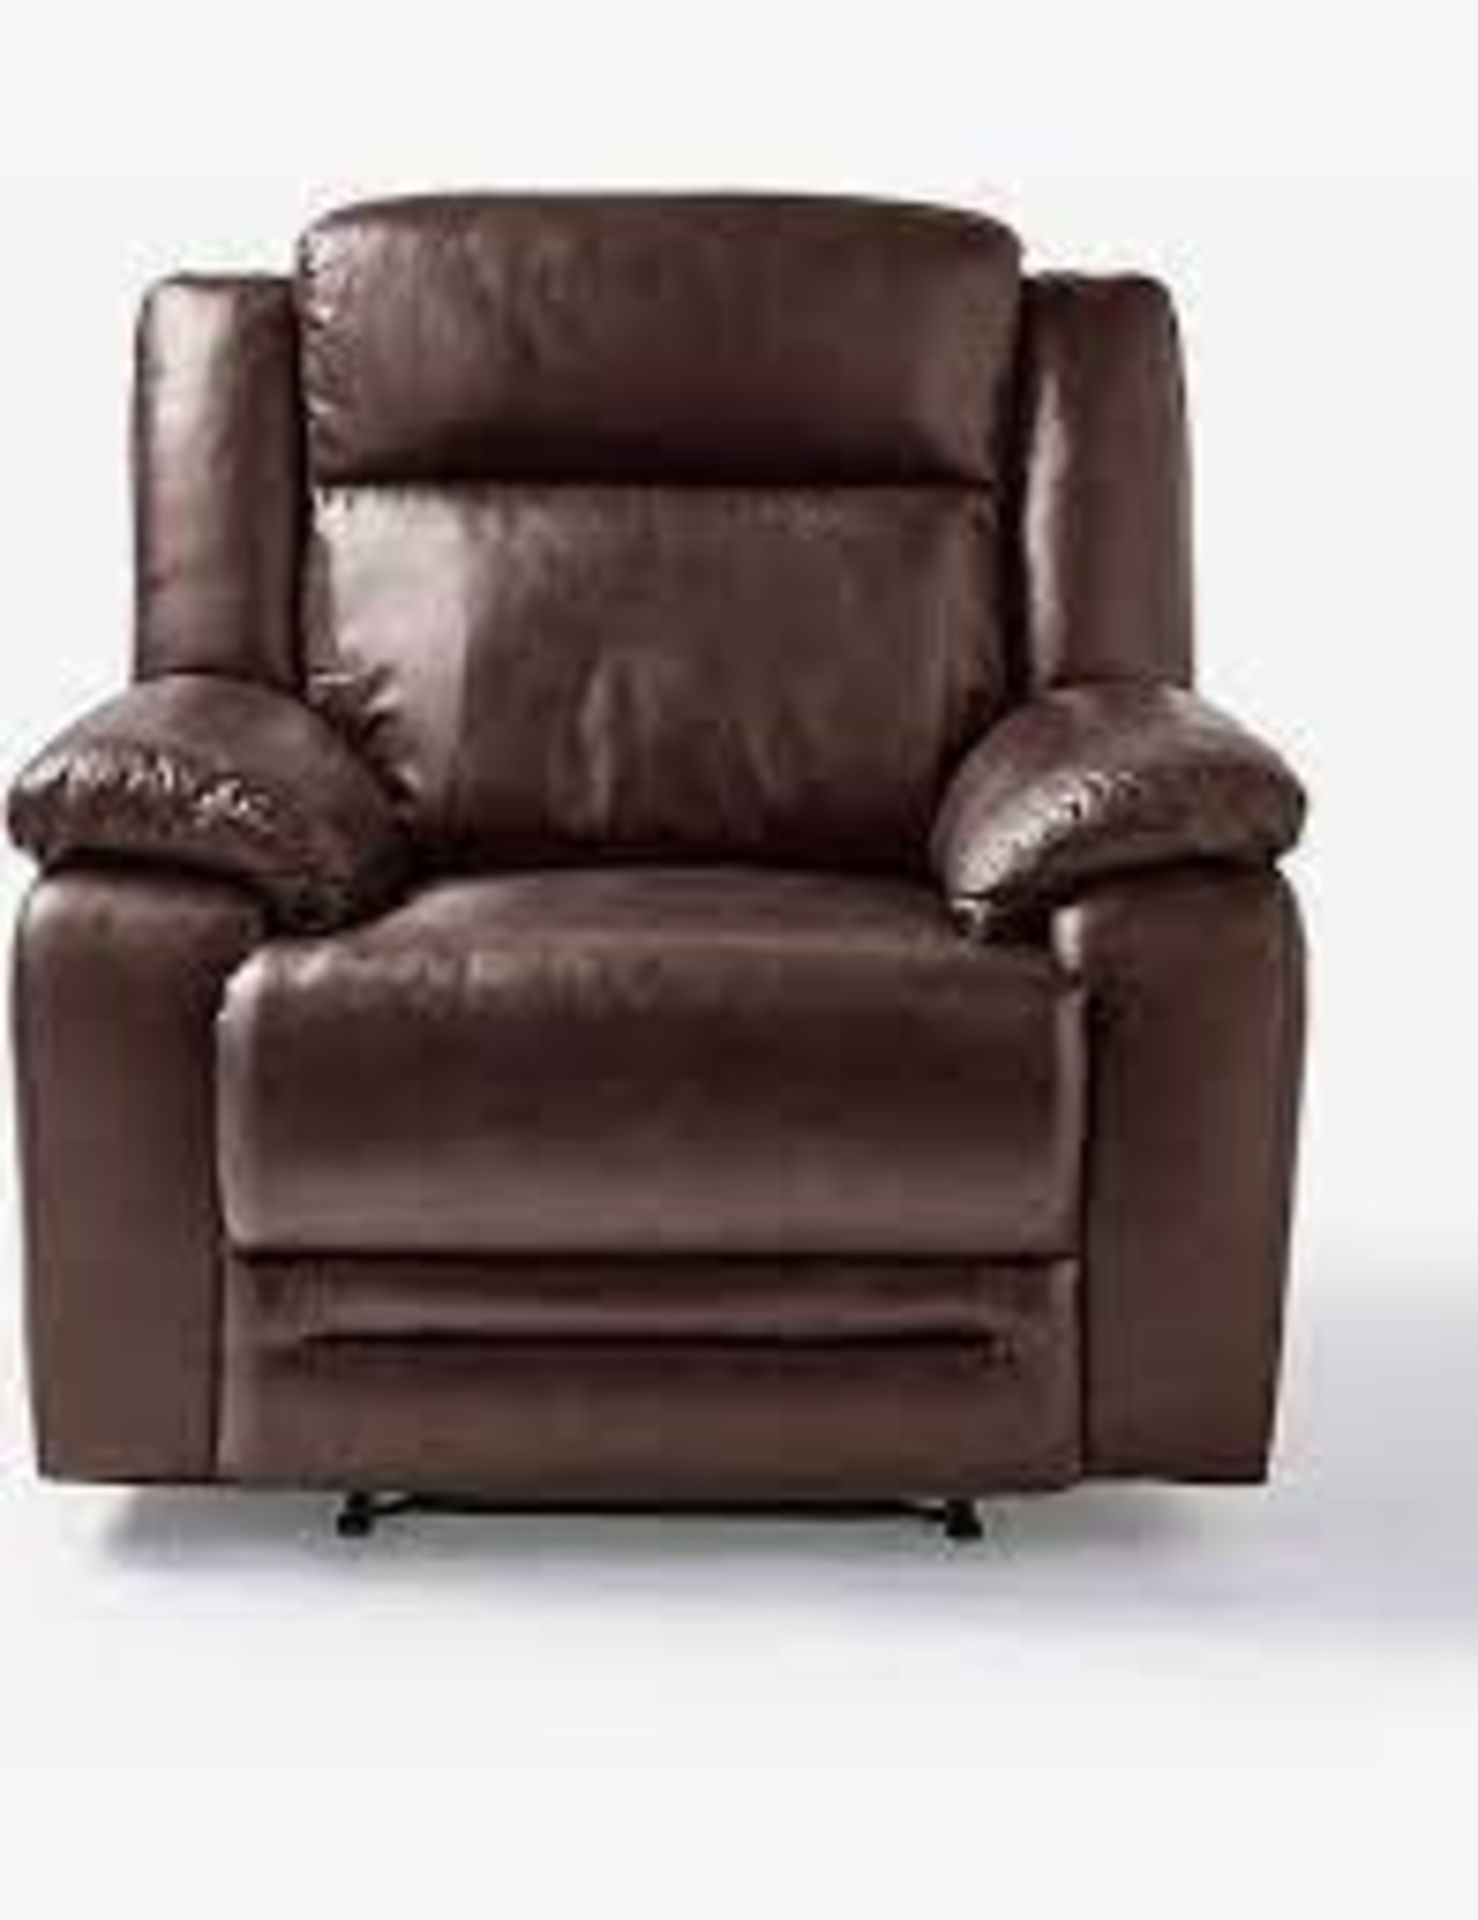 Warwick Leather Reclining Chair. RRP £1,955.00. *this is in black* SR5